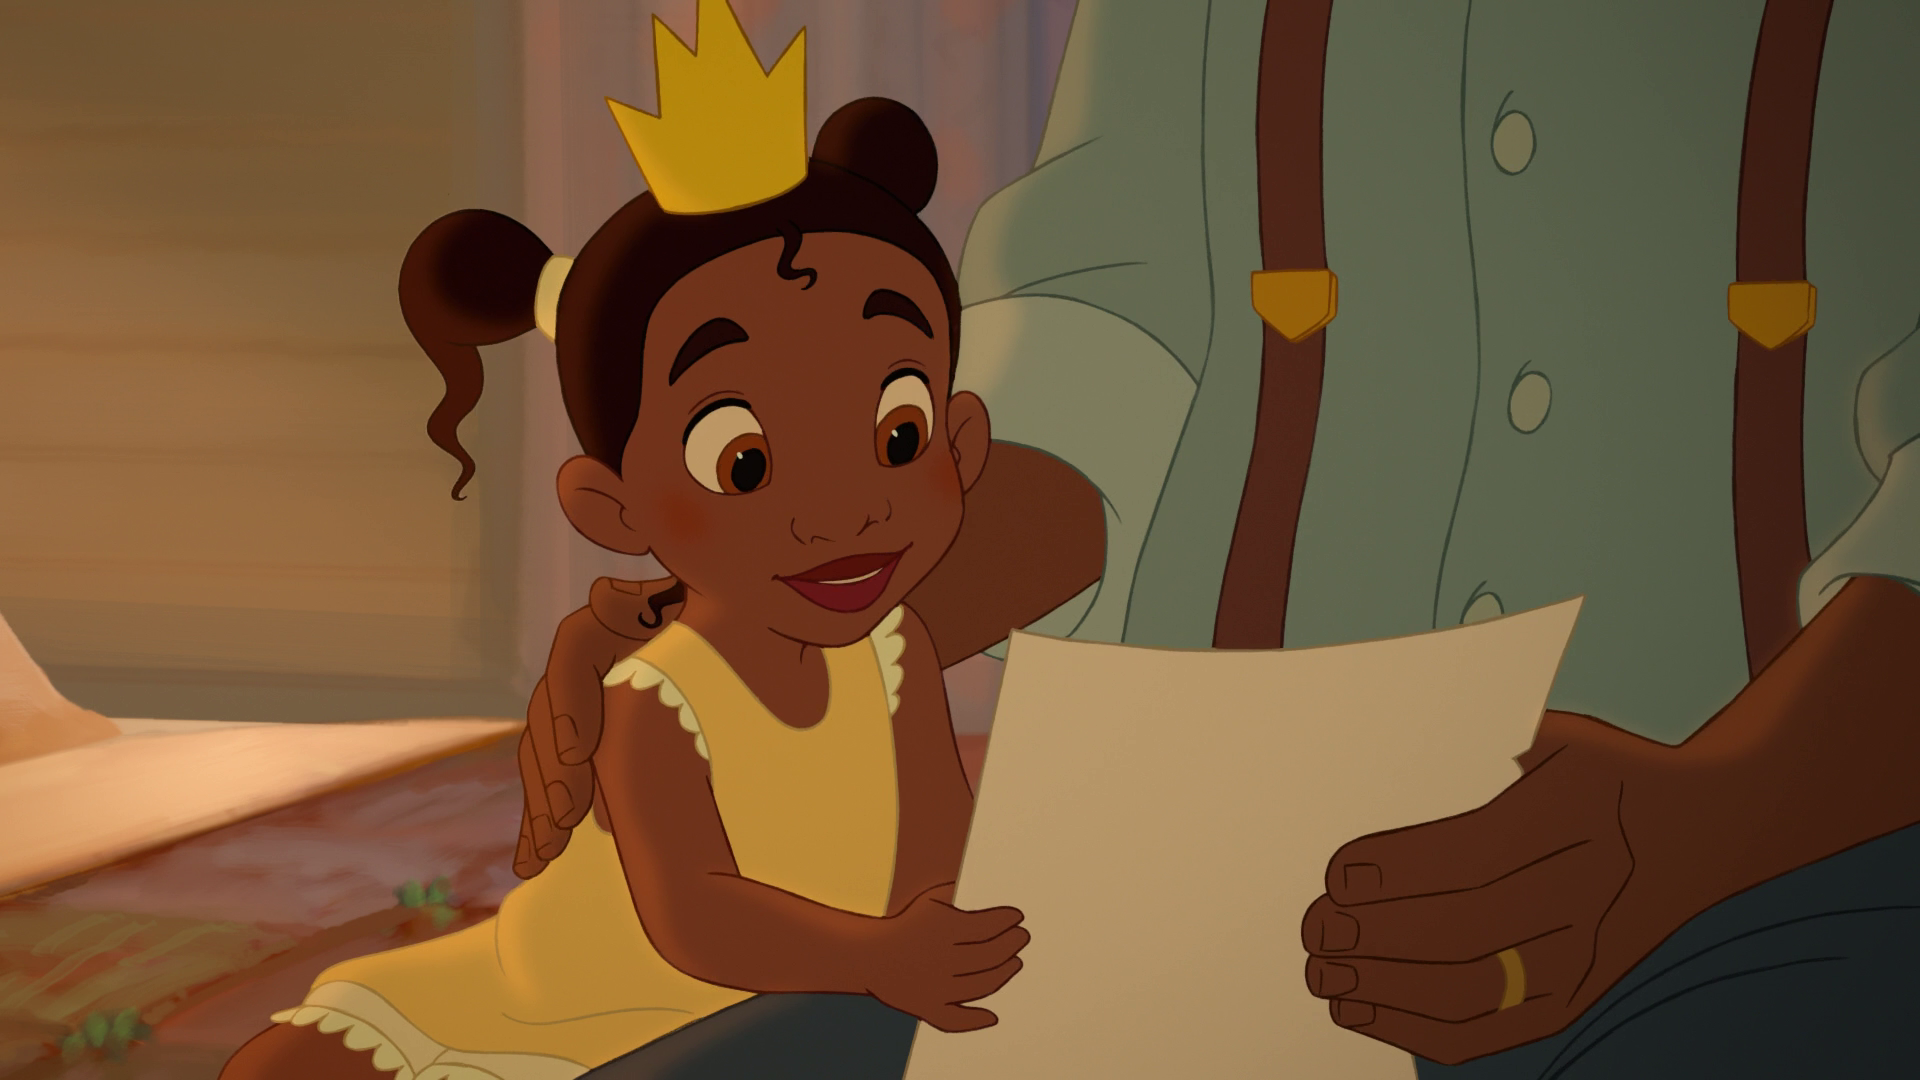  The.Princess.And.The.Frog.2009.1080p.Bluray.x264-LCHD 6.56GB-6.png